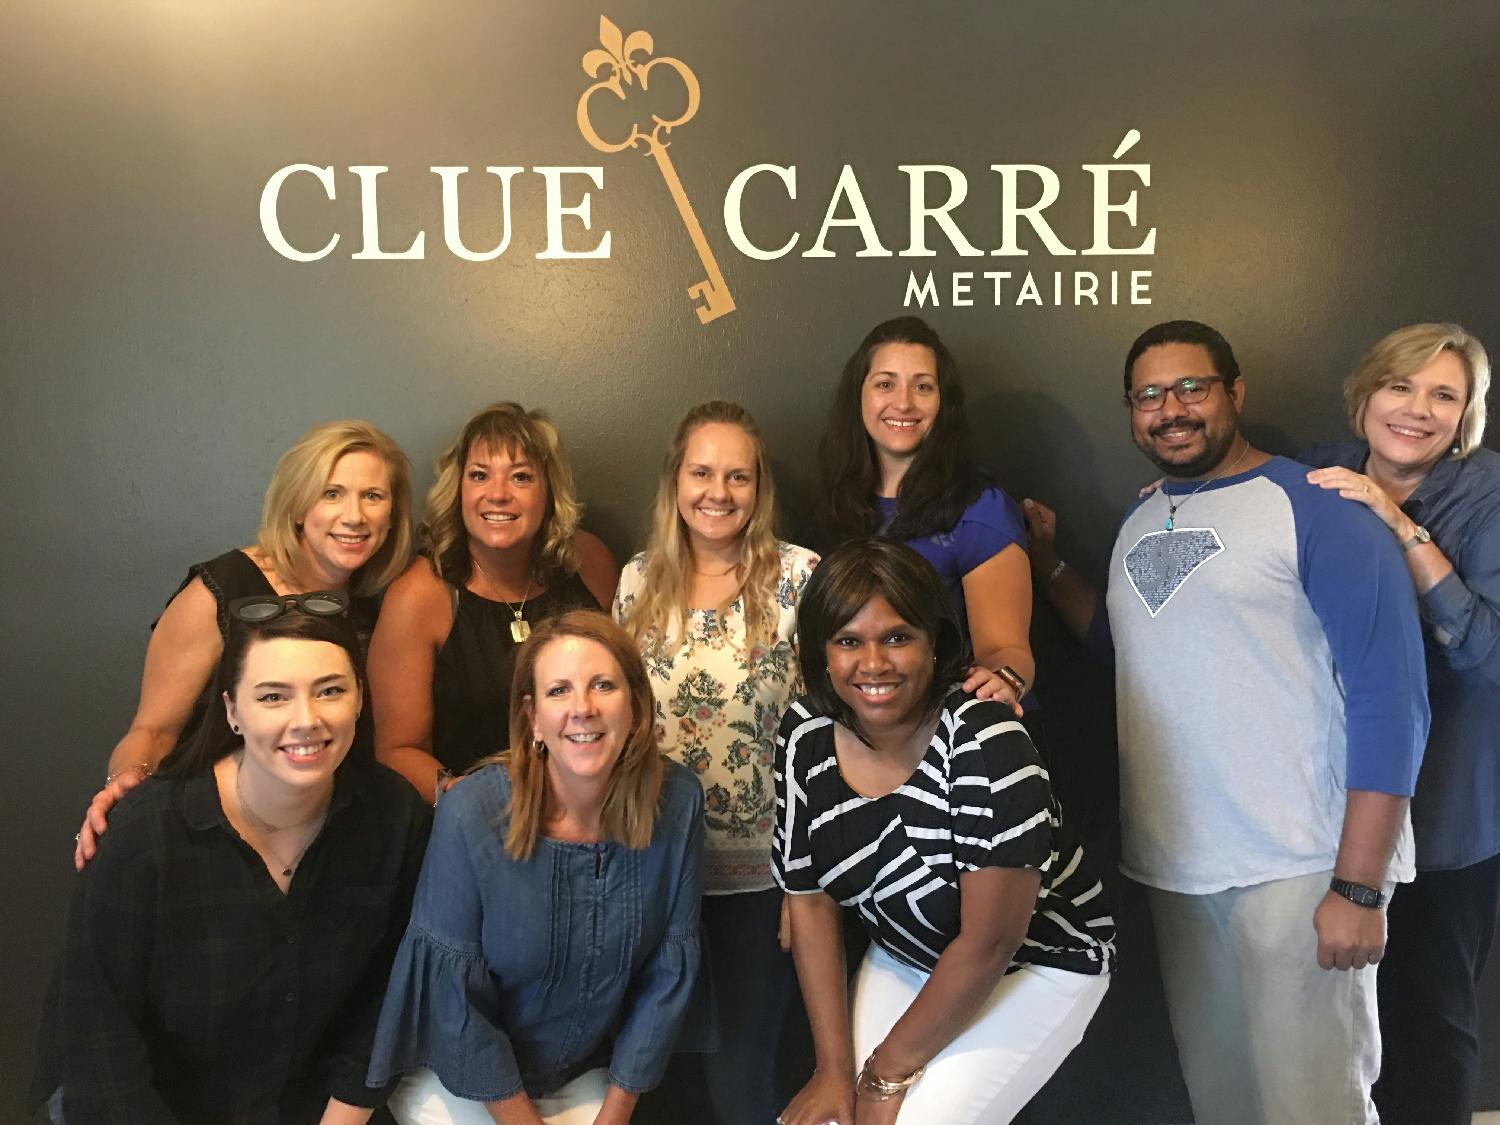 Staff Event at Clue Carre, Metairie